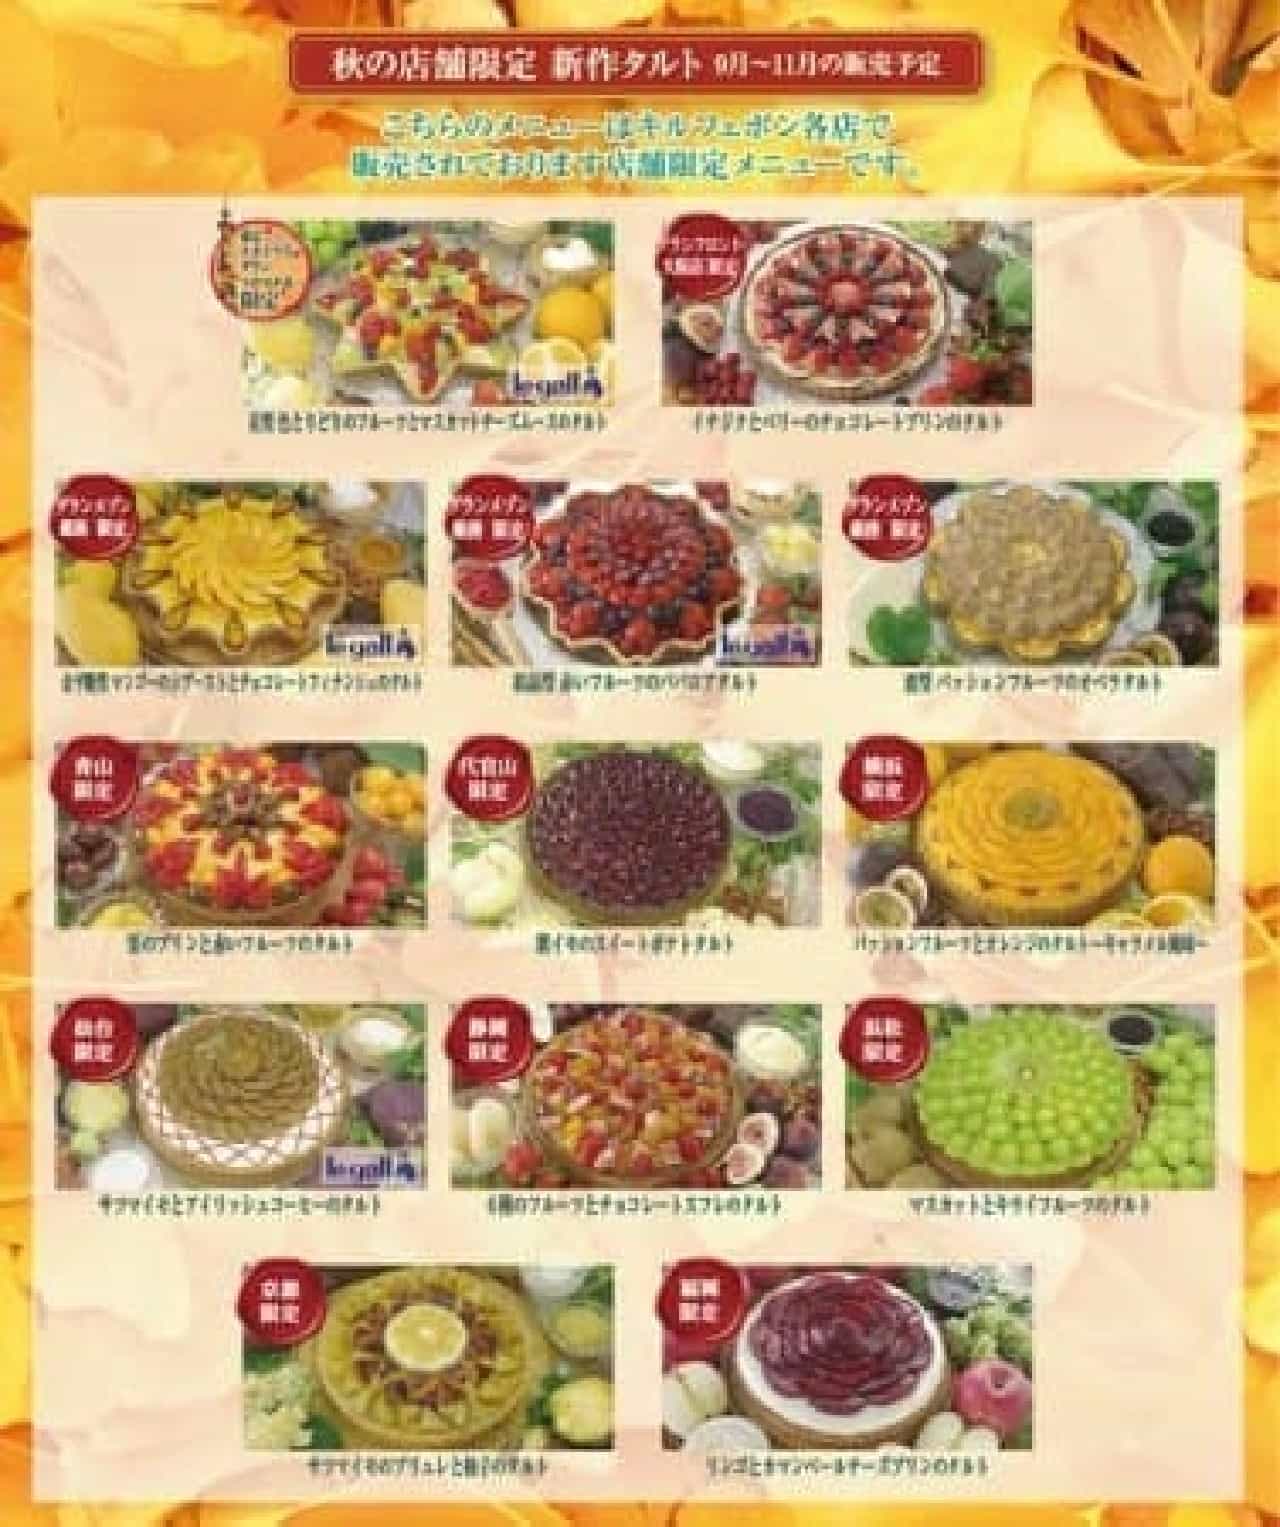 There are 13 types of store-limited "autumn tarts" (Image: Kirfebon official Facebook page)